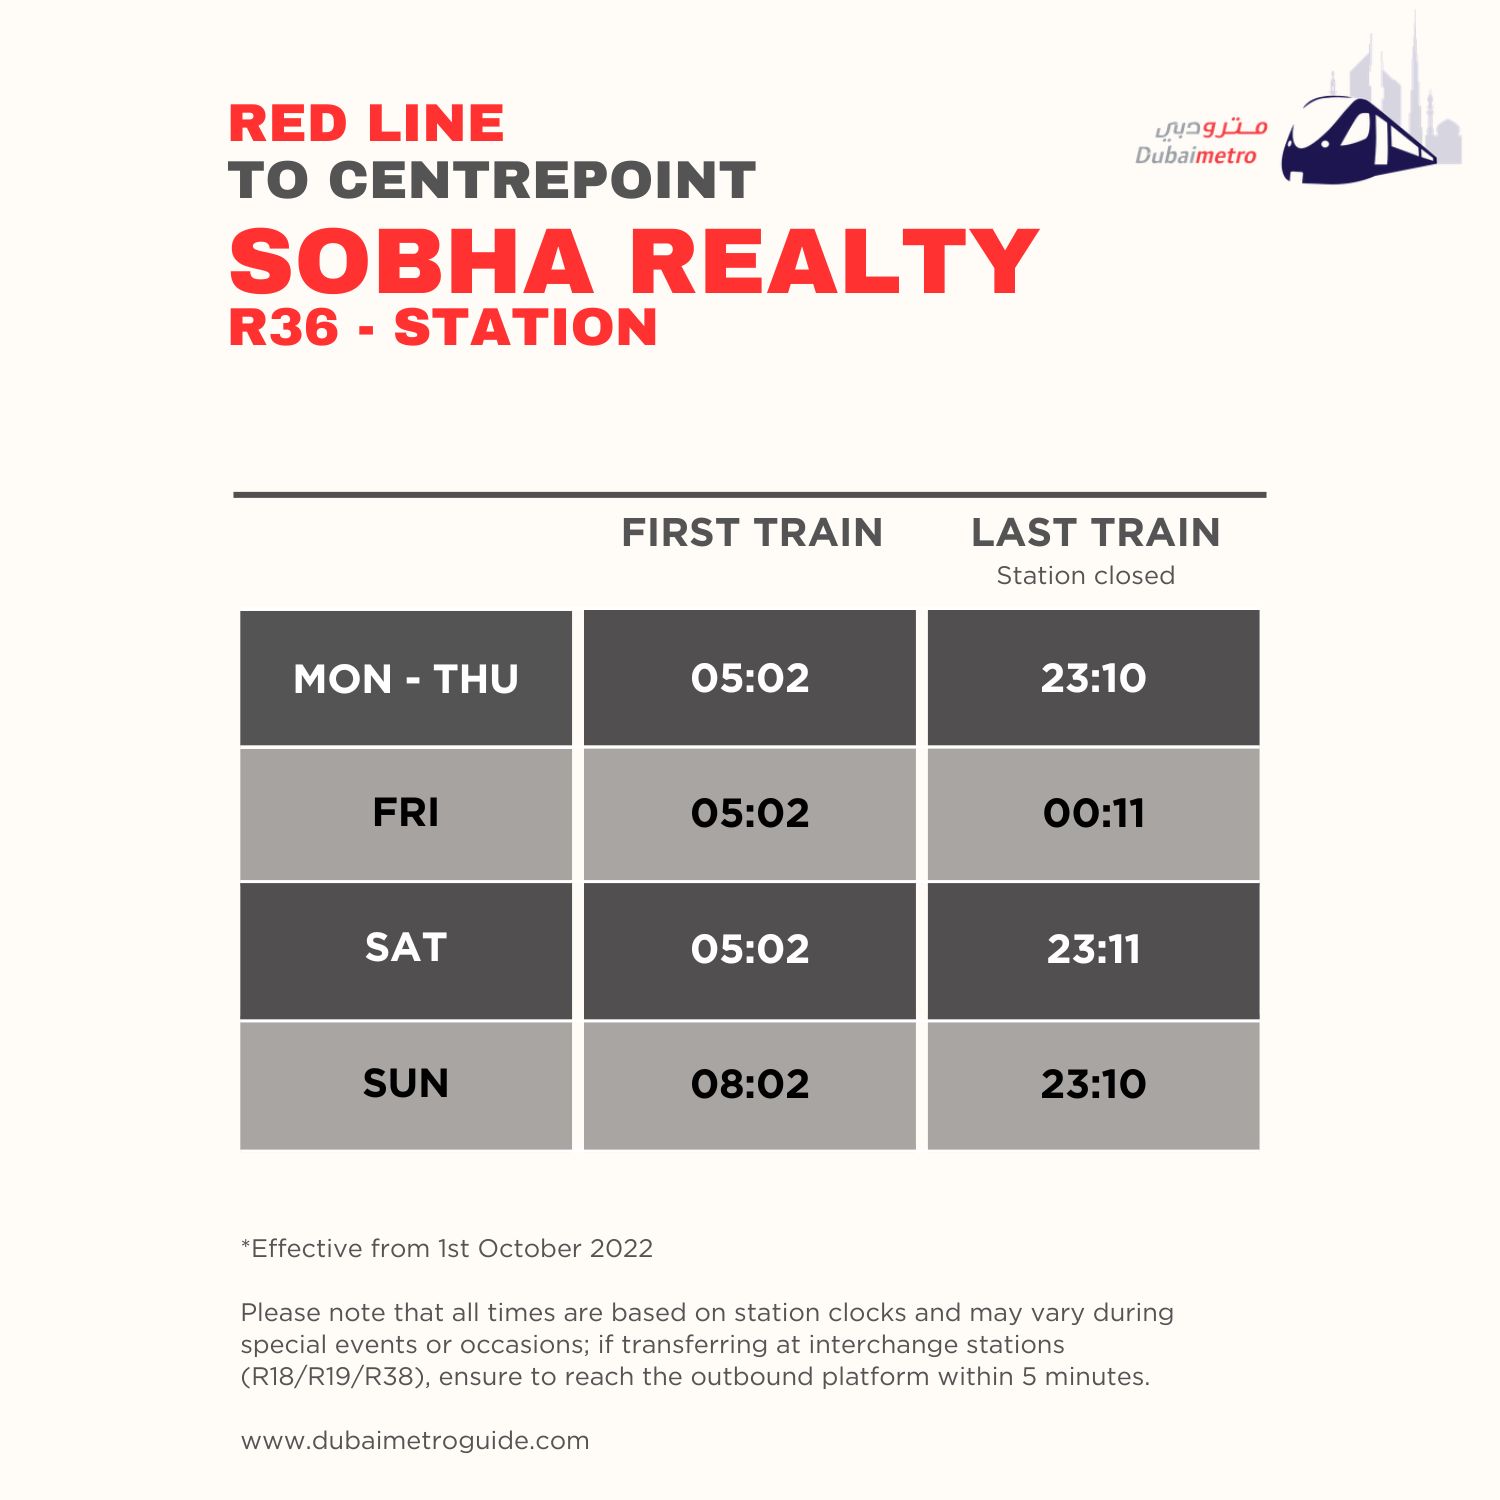 SOBHA Realty Metro Station Timings to Centrepoint - First Train and Last Train Timings